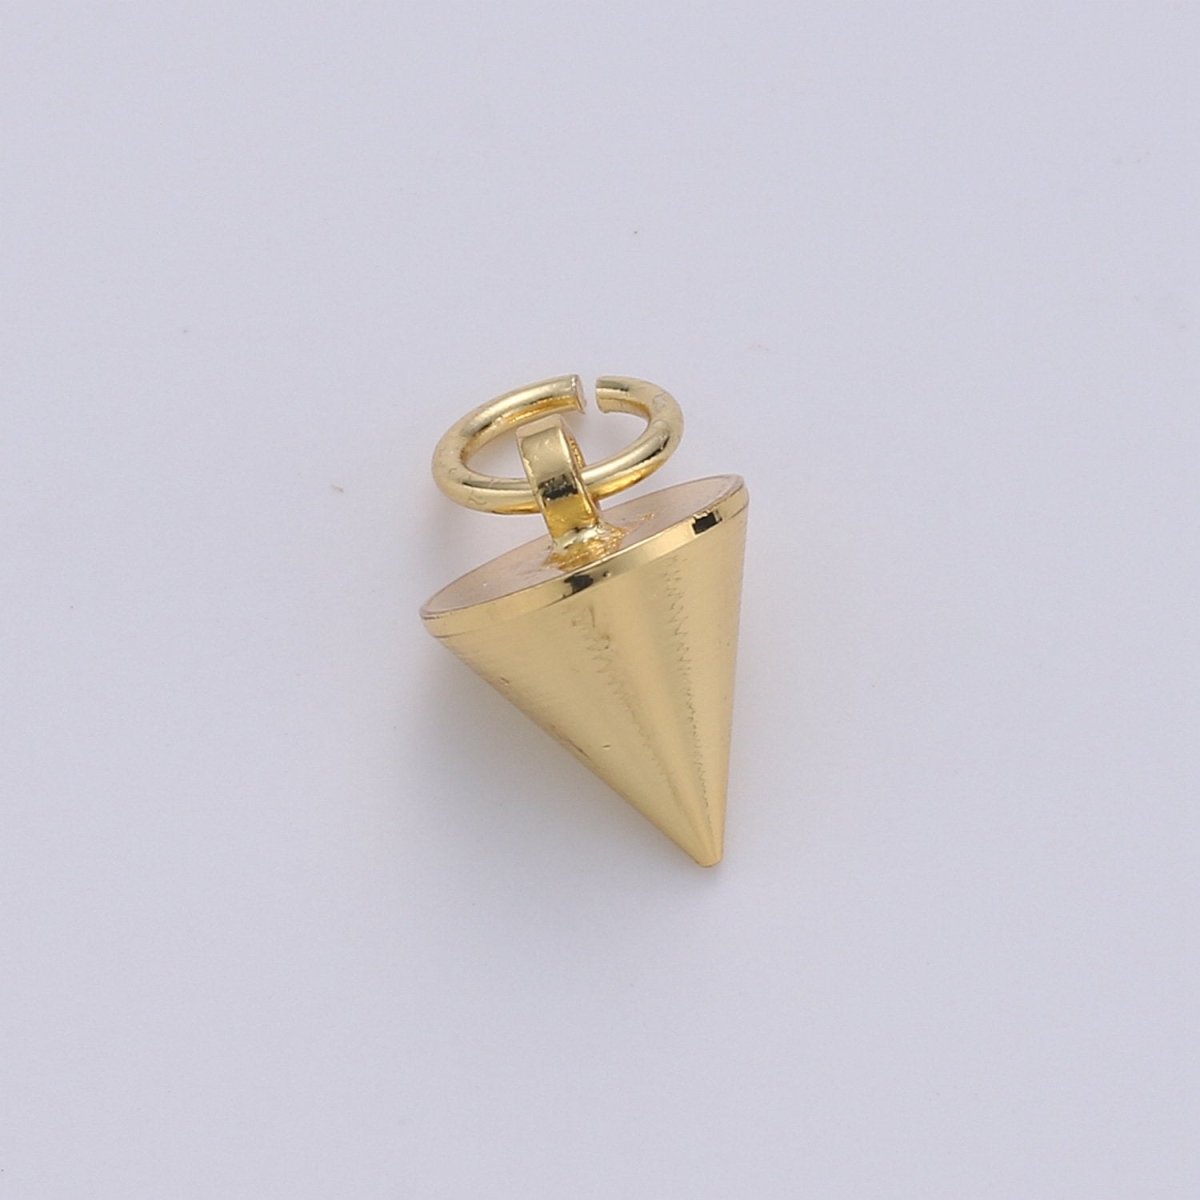 Dainty 24K Gold Filled Spike Charms,11x7mm Spike Pendants Conical Spike Charm,Drop Pendulum Pendant Stud Charm,Jewelry Finding K-800 - DLUXCA